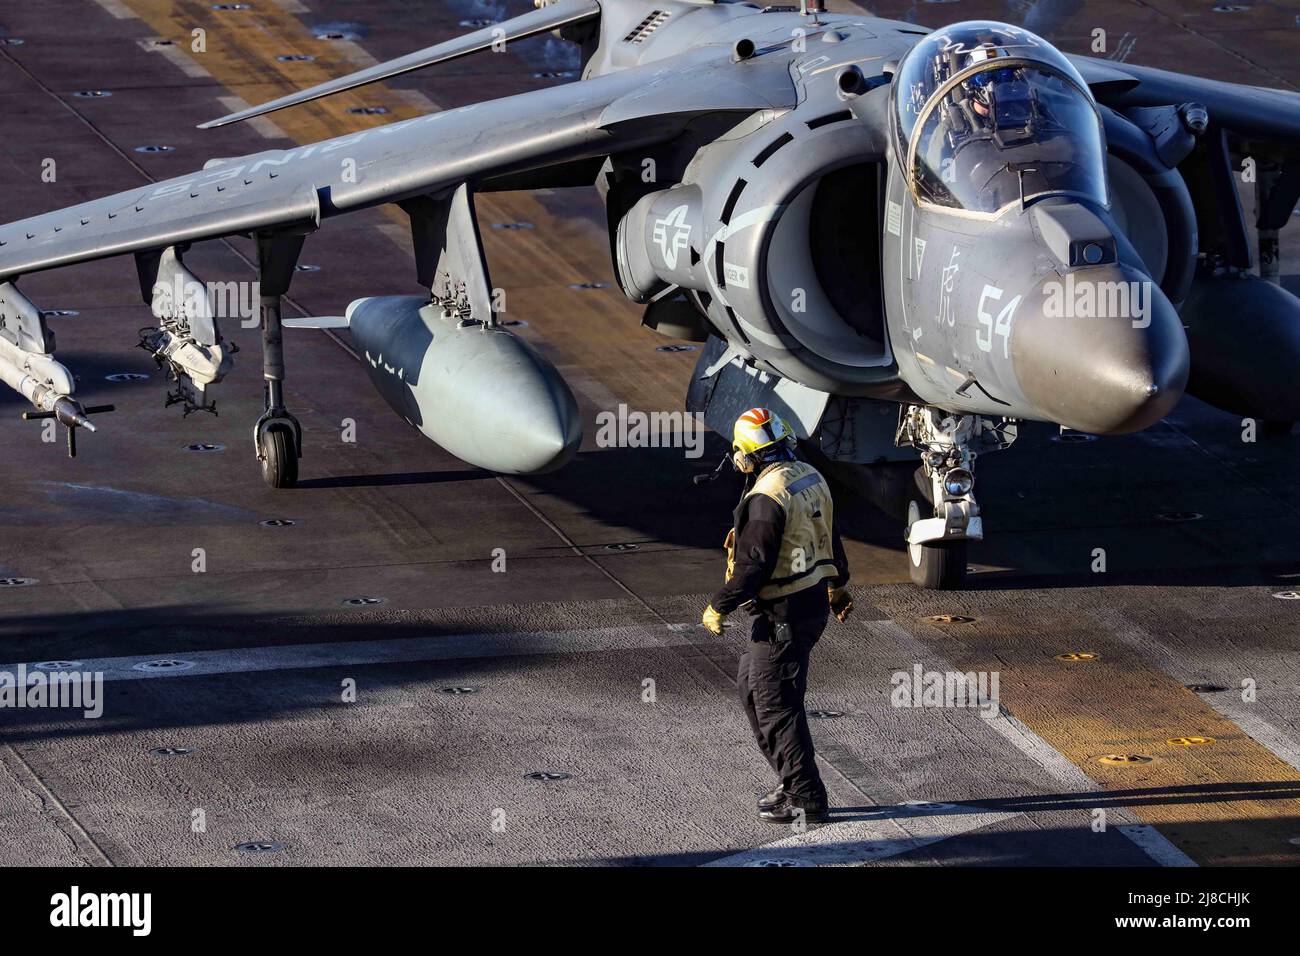 A U.S. Navy sailor prepares a Marine Corps AV-8B Harrier attached to the Tigers of Marine Attack Squadron 542, to launch from the flight deck of the Wasp-class amphibious assault ship USS Bataan, November 3, 2019 on the Atlantic Ocean. Stock Photo